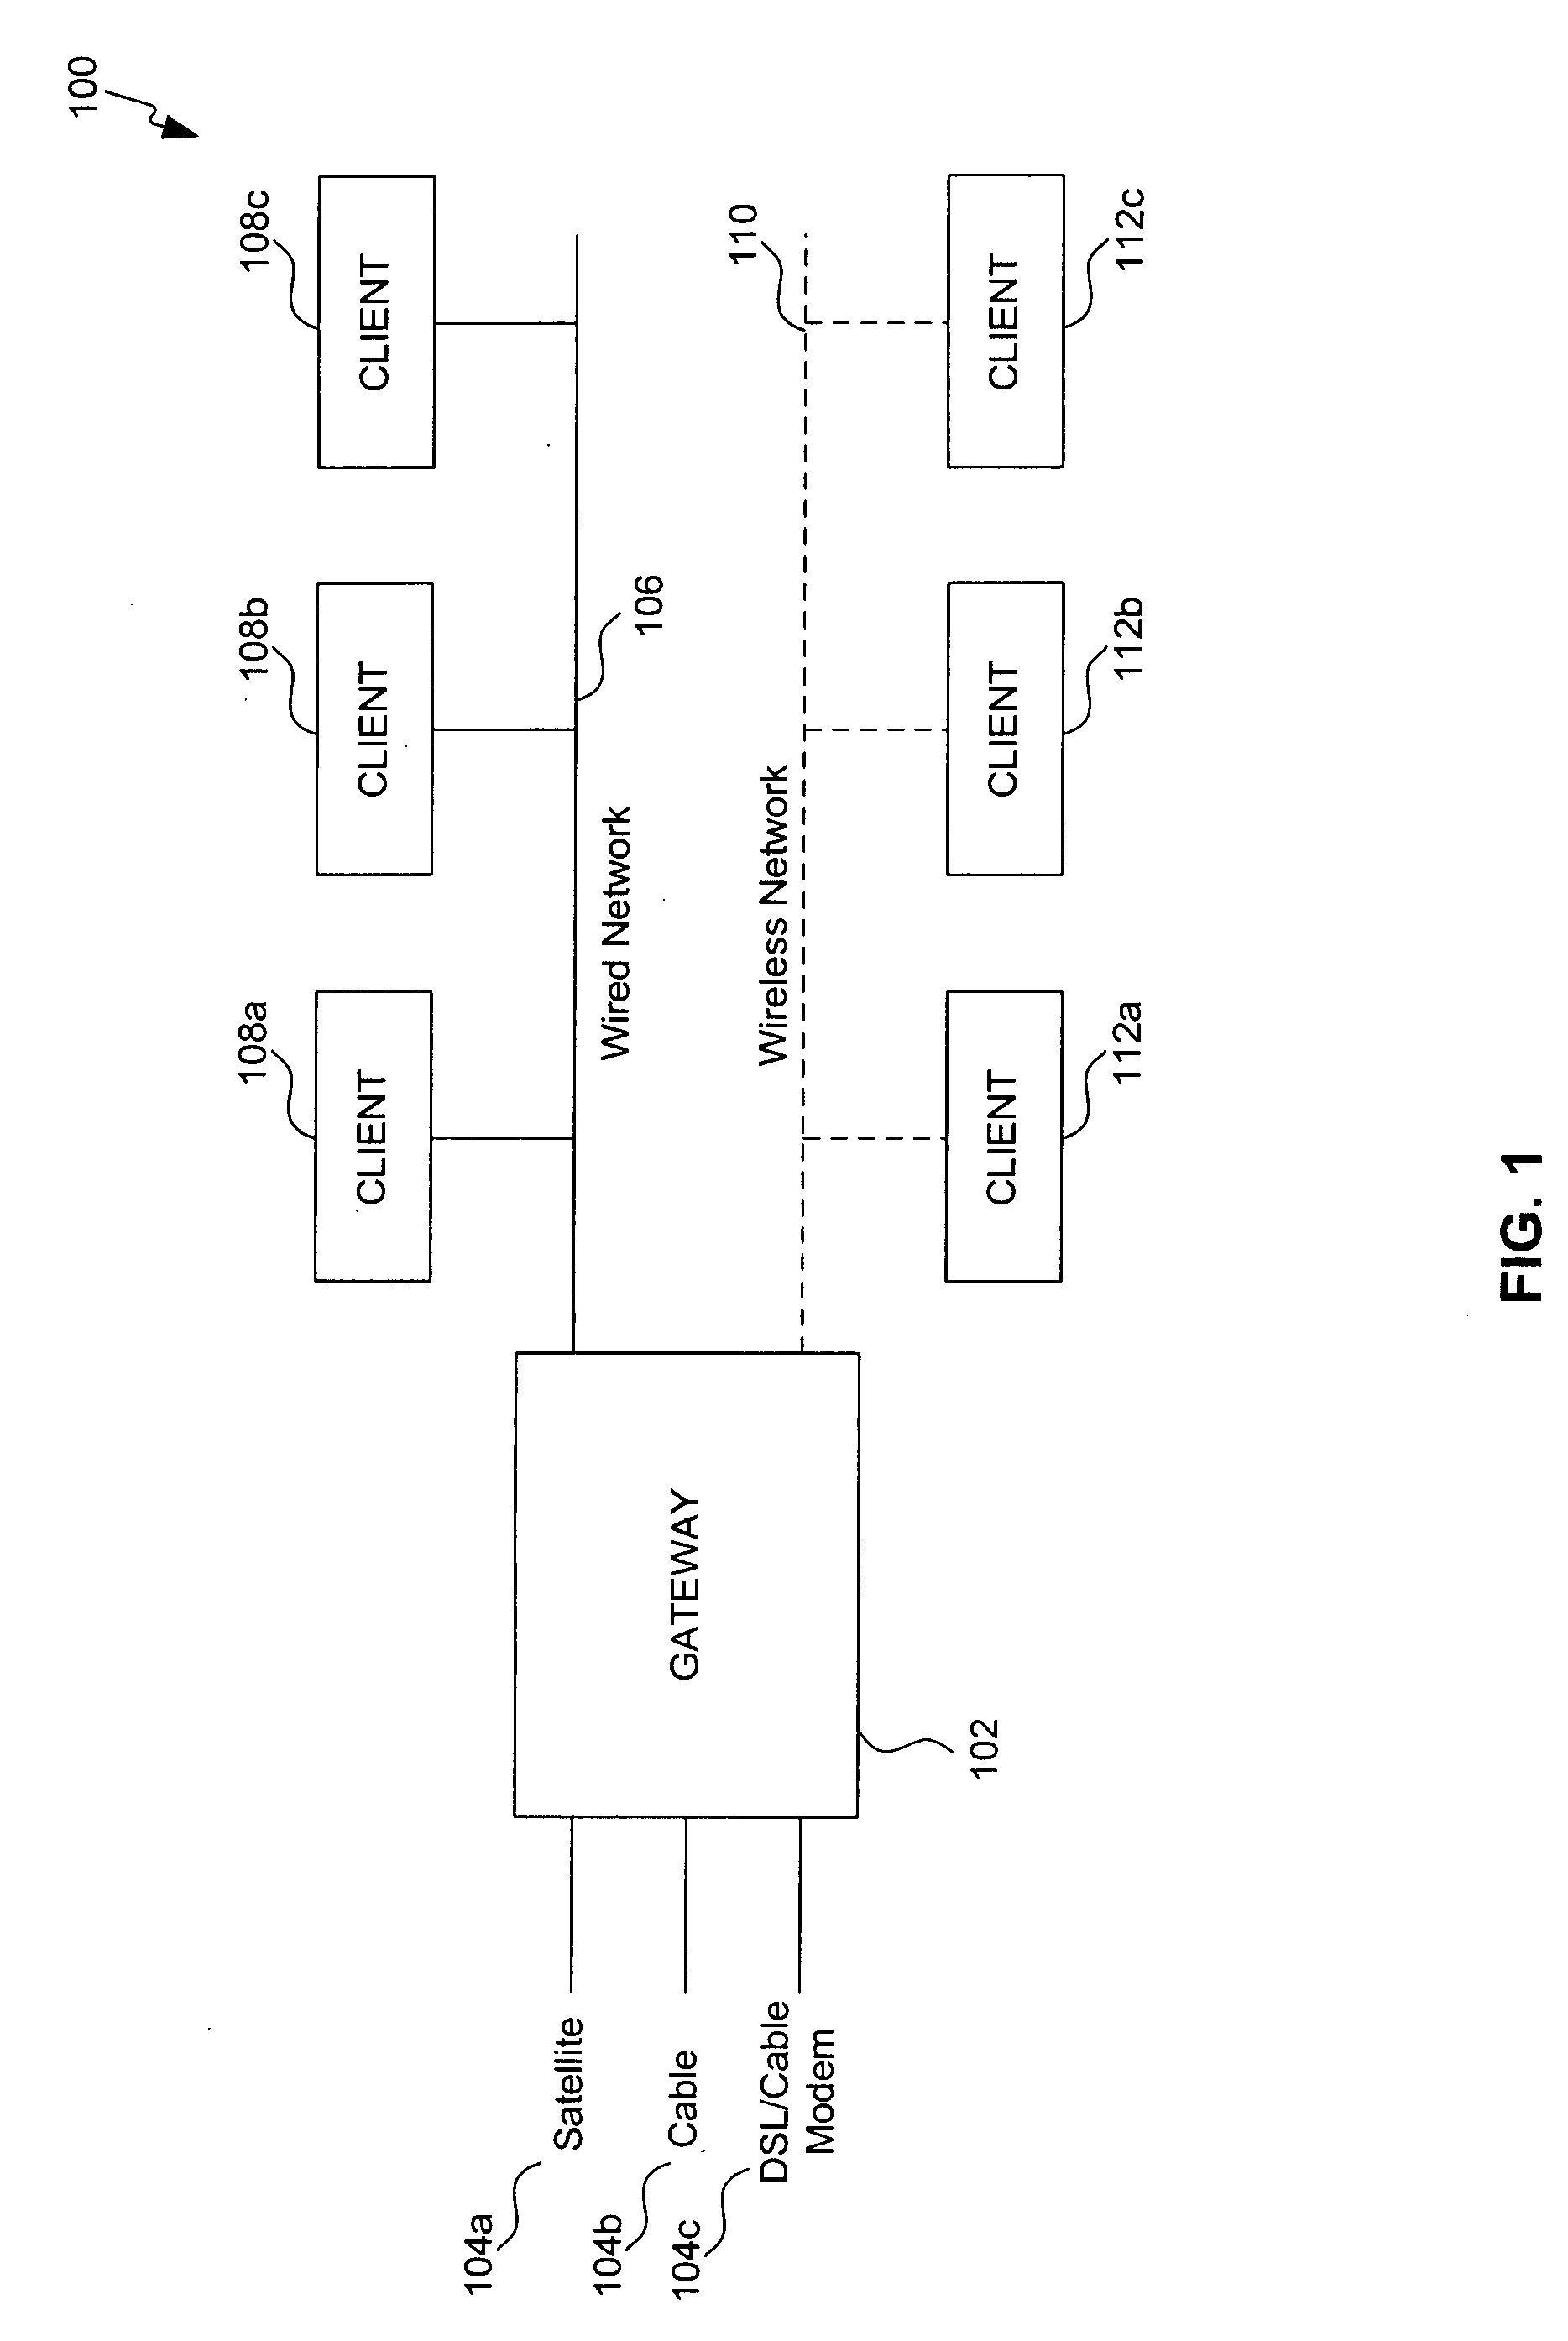 System and method for implementing video streaming over IP networks